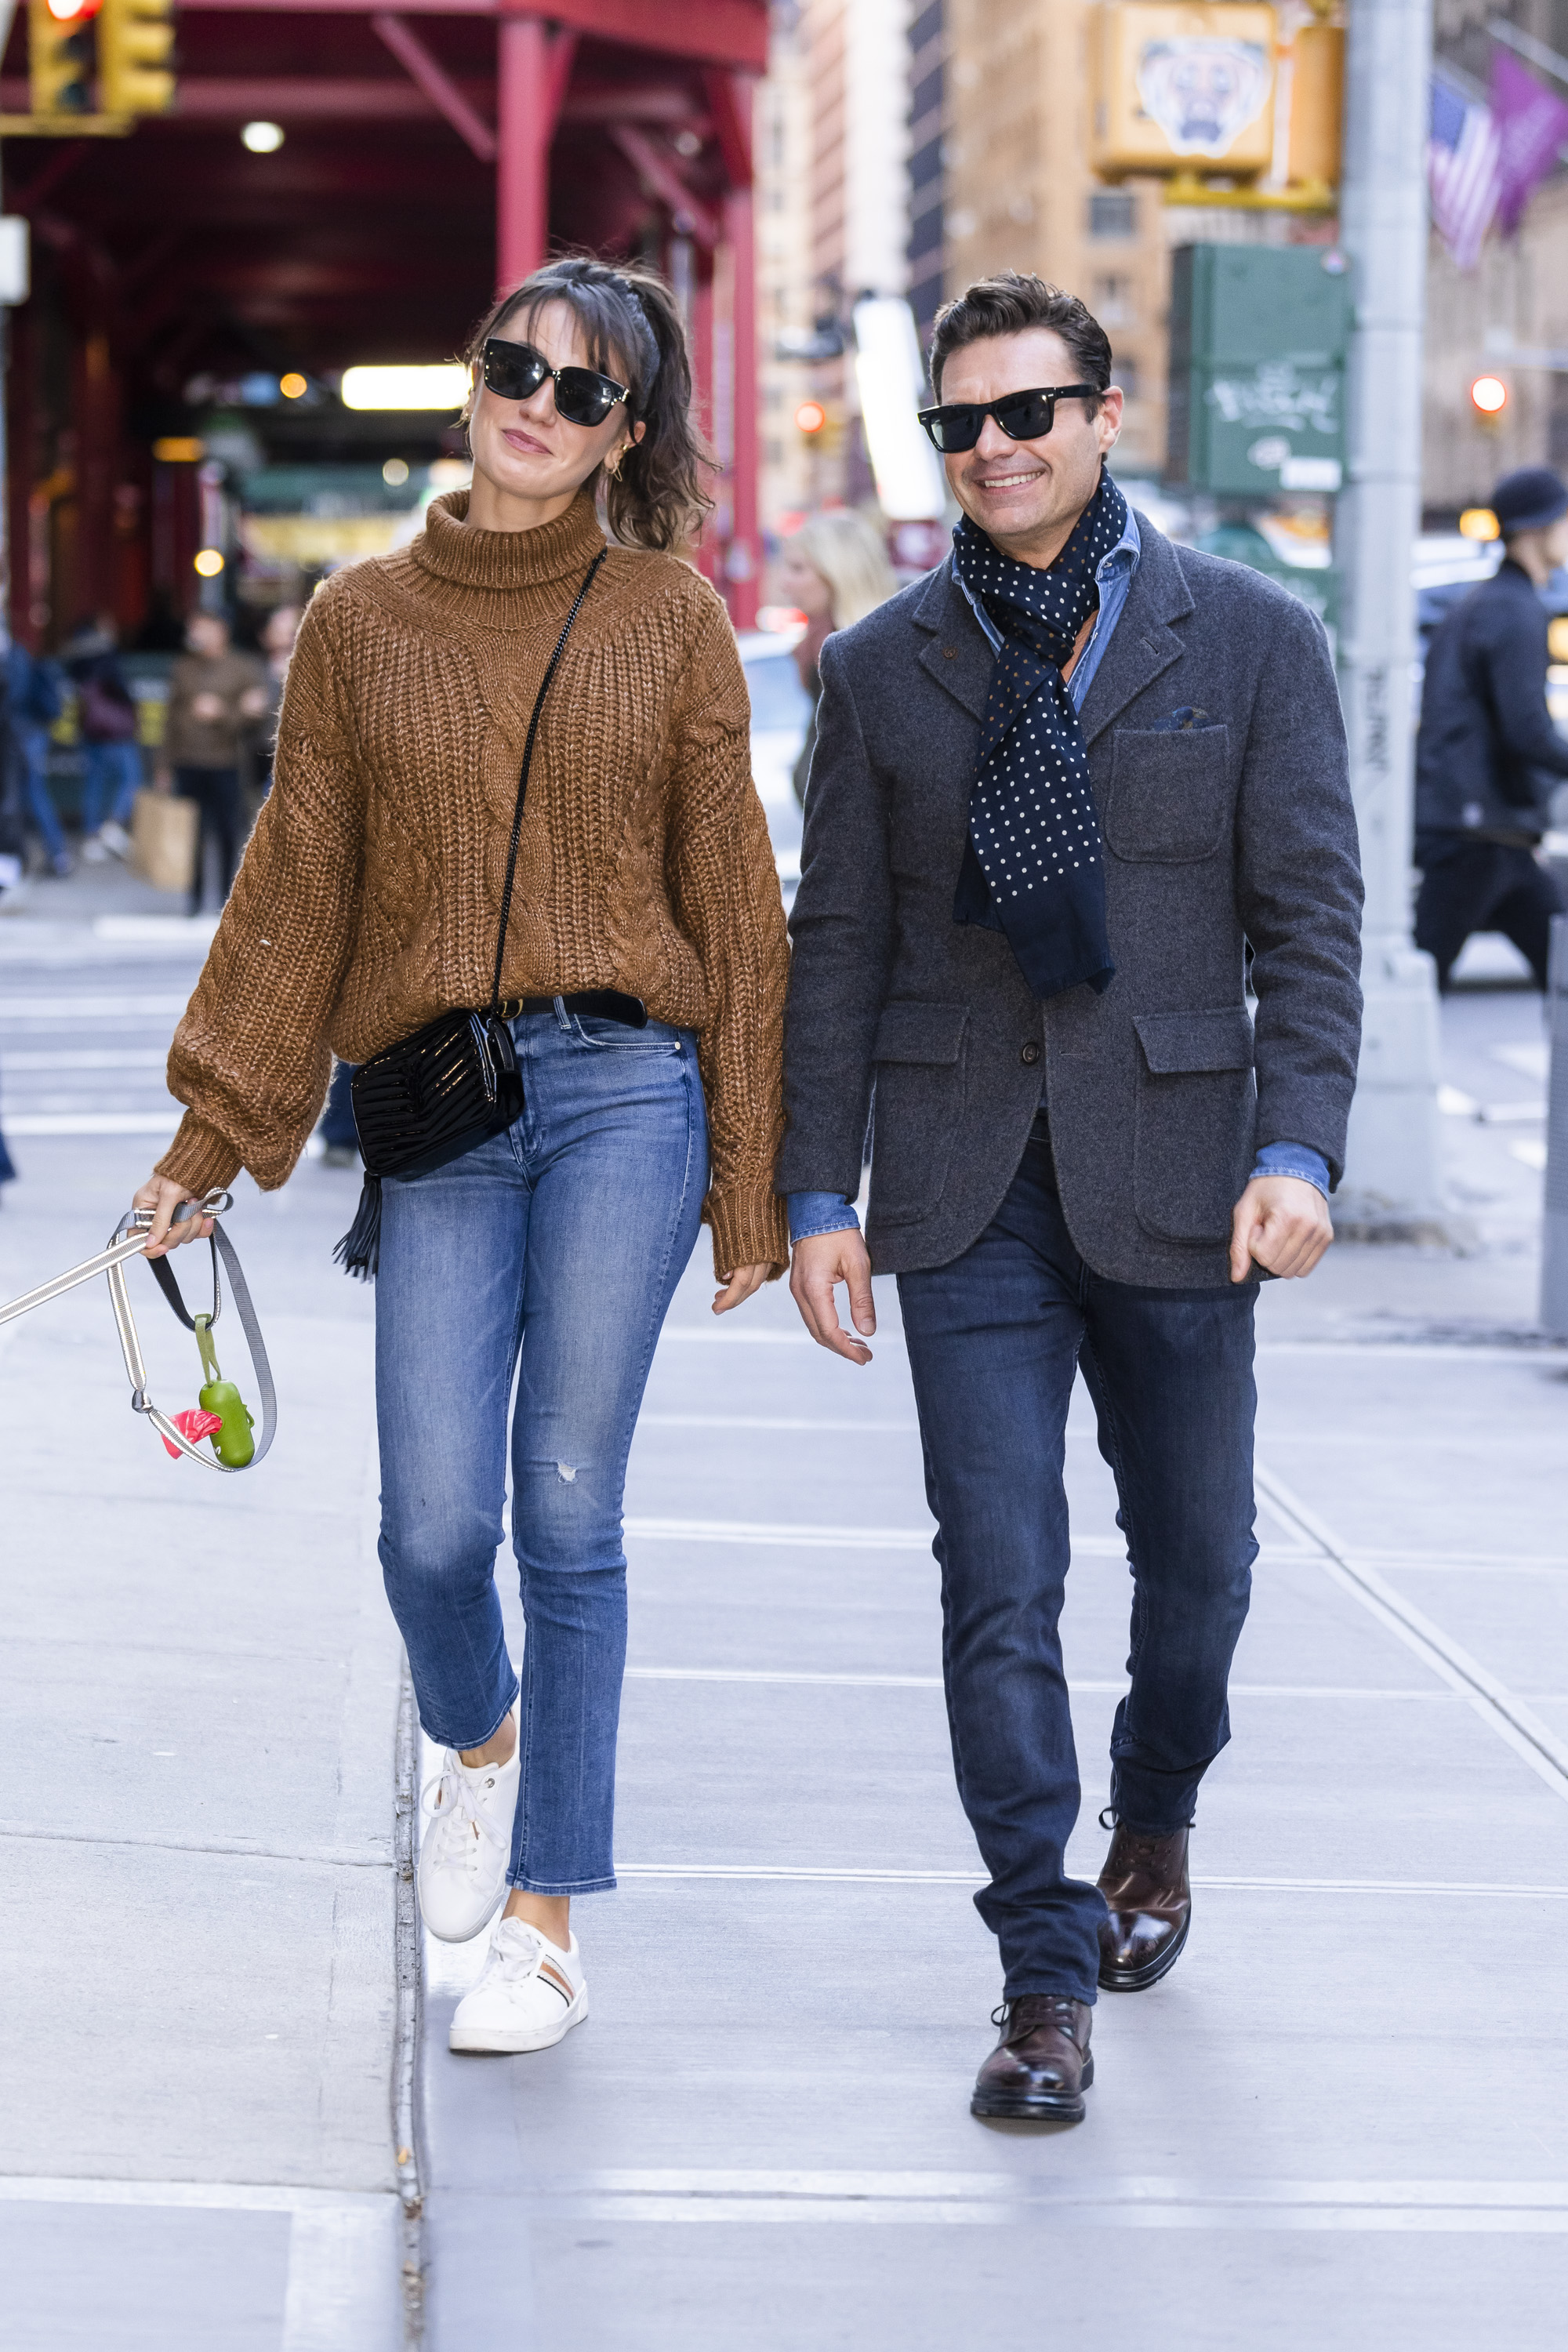 Aubrey Paige and Ryan Seacrest are seen in Midtown on October 18, 2022, in New York City. | Source: Getty Images